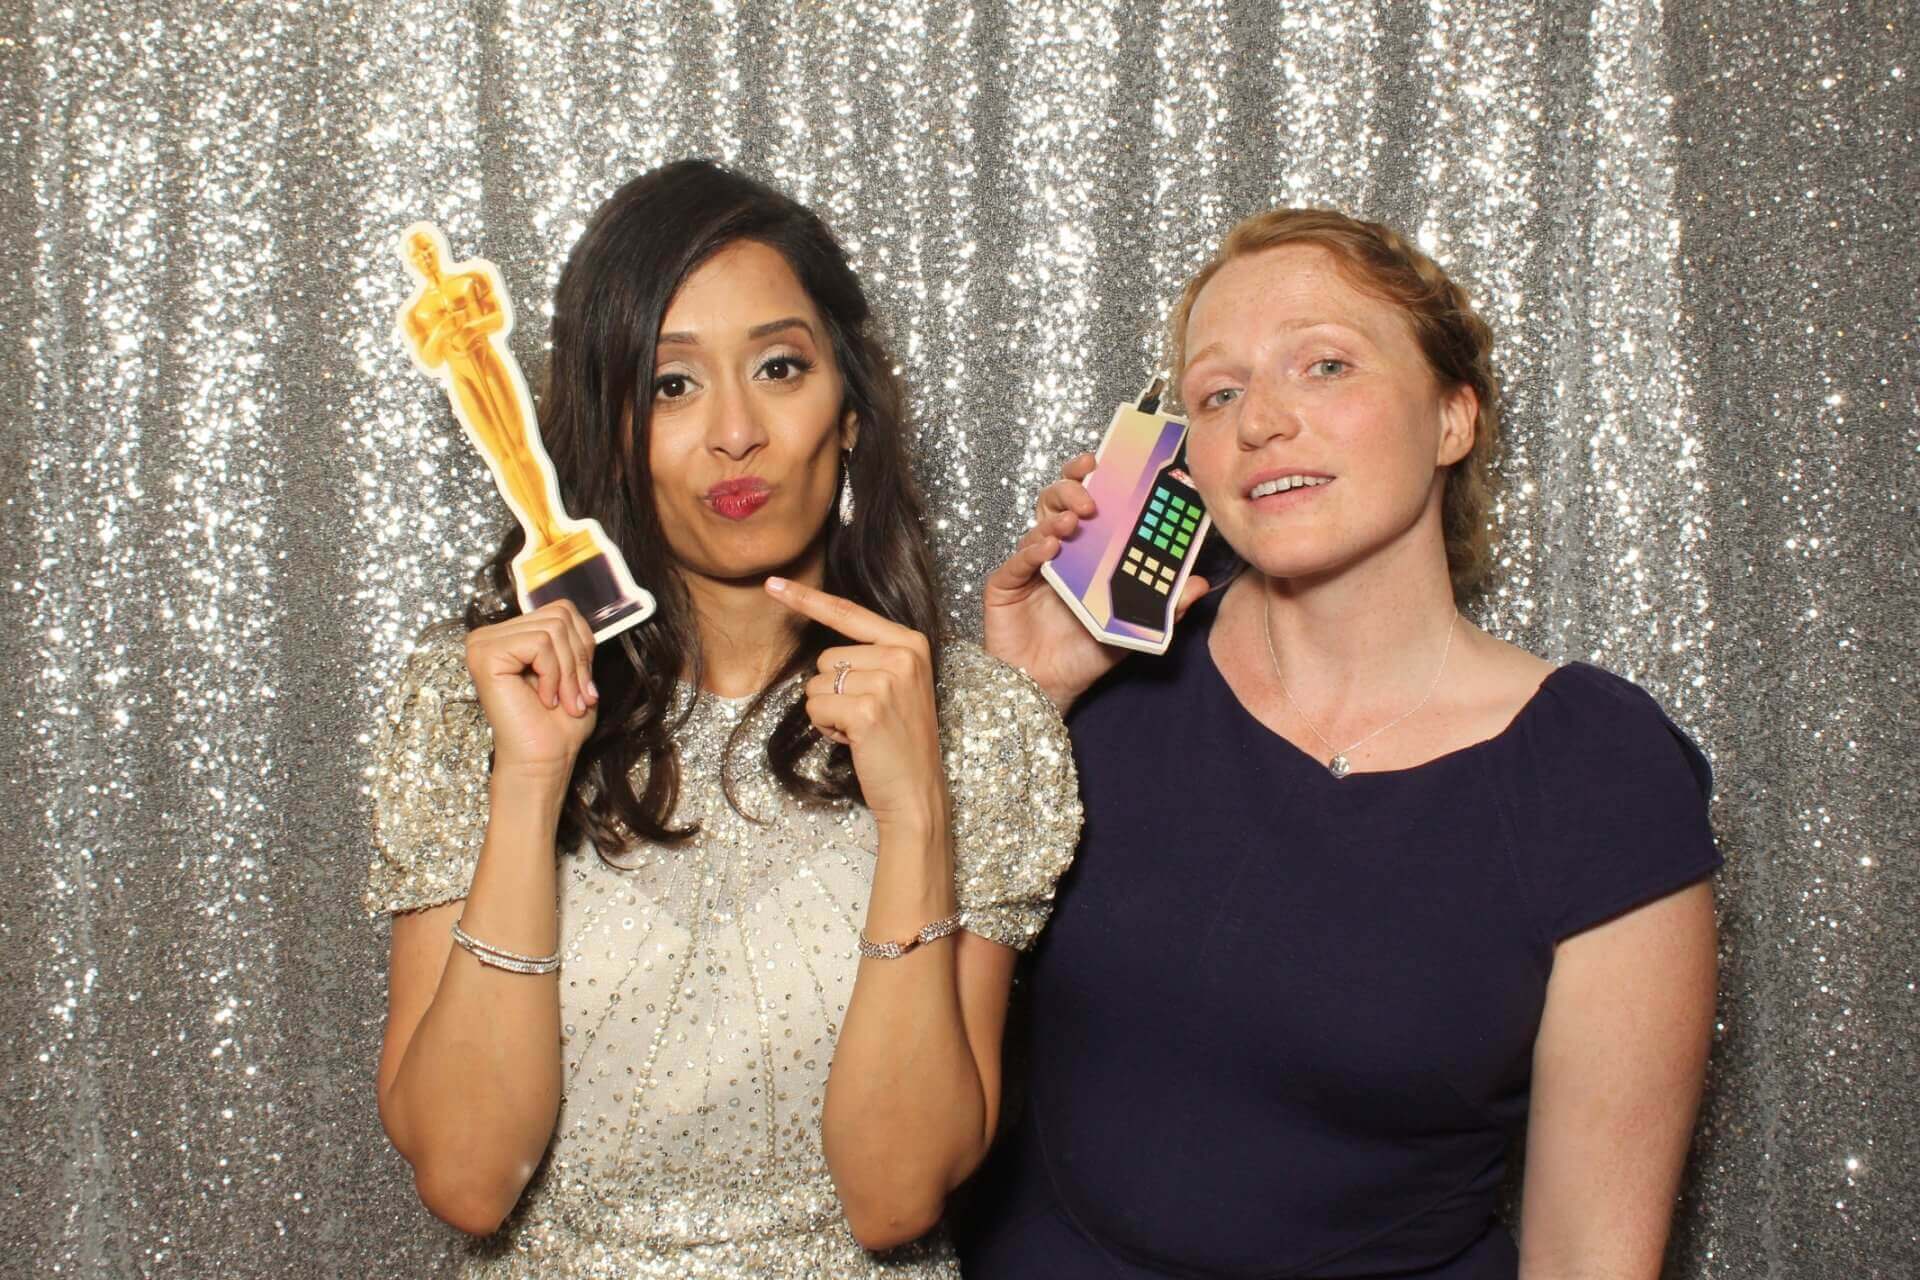 Photo booth rental in Toronto for an event. Posing in front of a beautiful silver sequin glitter backdrop offered by LOL Photo Booth. Tags: Event planning ideas, Photo booth prints, high resolution photos, Toronto photo booth rental services. GIFS, Boomerangs, Mosaic Walls, Slow motion, brand activation.